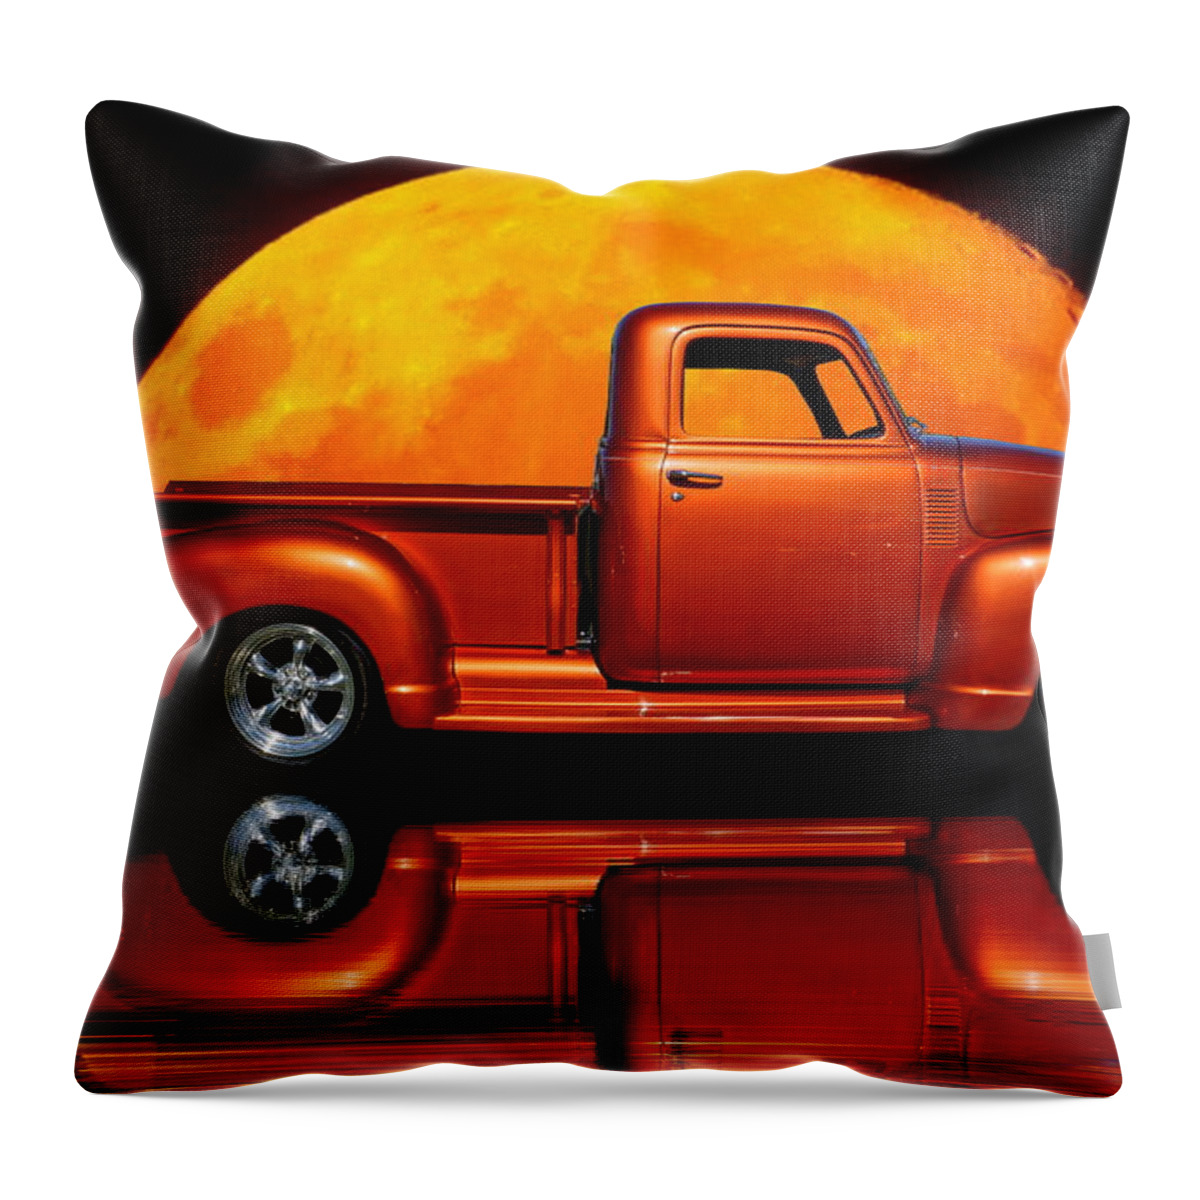 Reflection Throw Pillow featuring the photograph 1950 Chevy Pickup Poster by Alan Hutchins